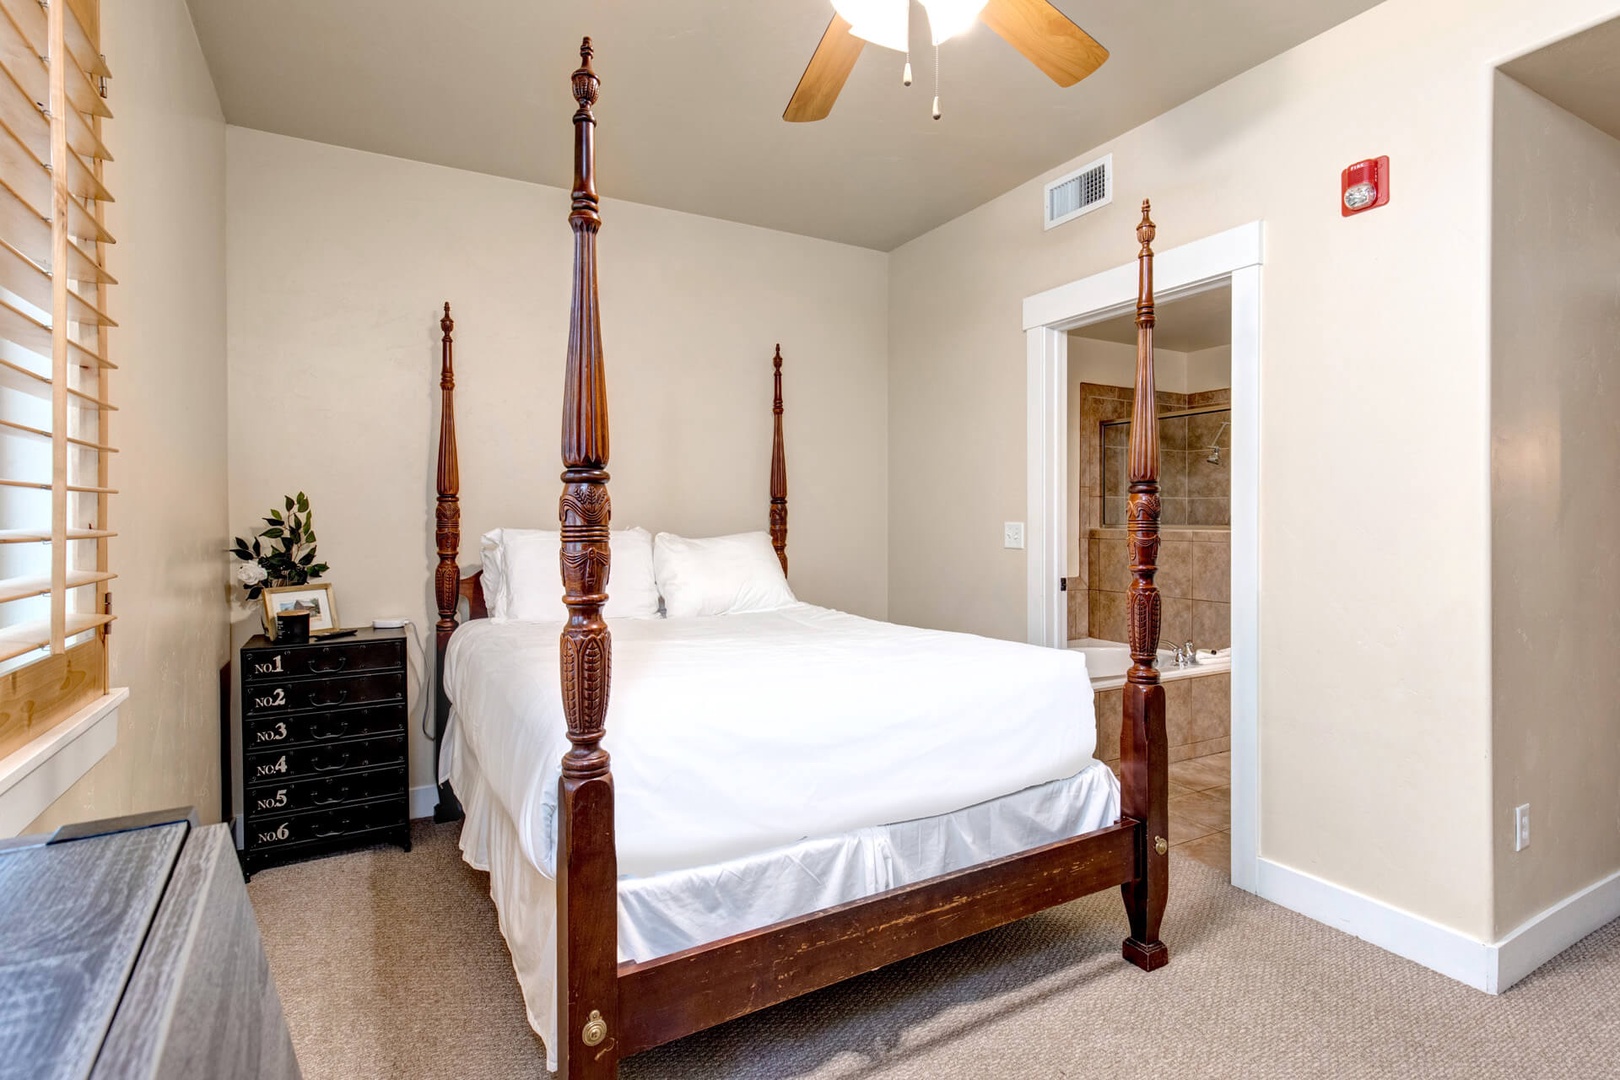 Bear Hollow Lodges 1104: The Master bedroom in appointed with a Queen-sized bed, luxurious bedding and a full attached bathroom with a walk-in shower.